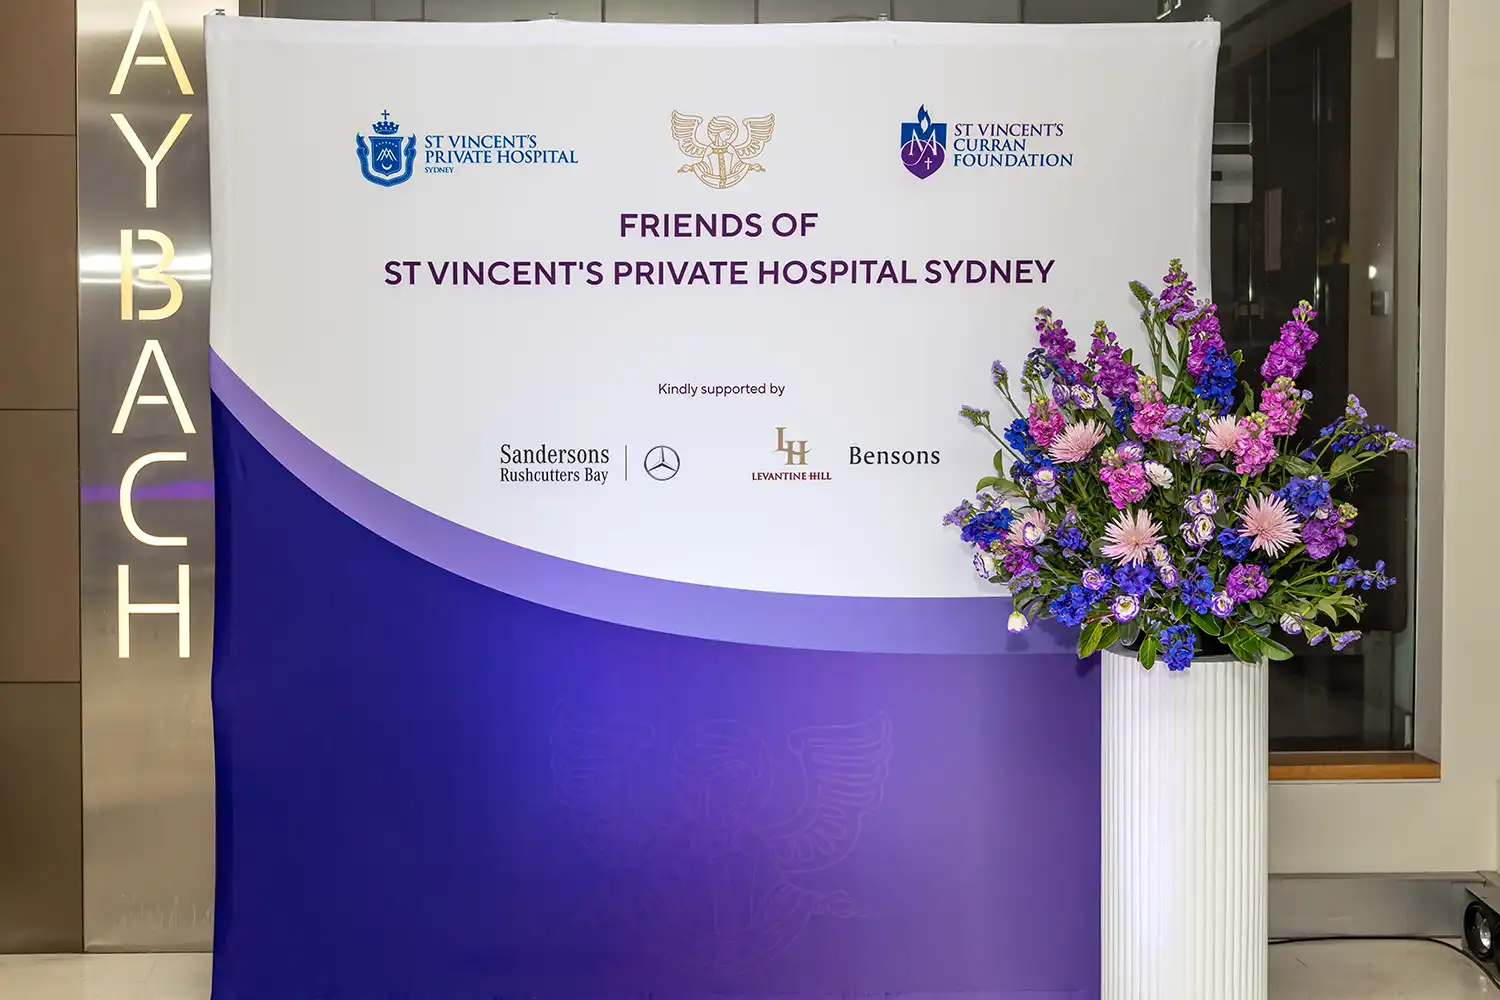 Photos of the Media wall of Friends of St Vincent's Private Hospital Sydney, Currans Foundation, with a vase of flowers in front.